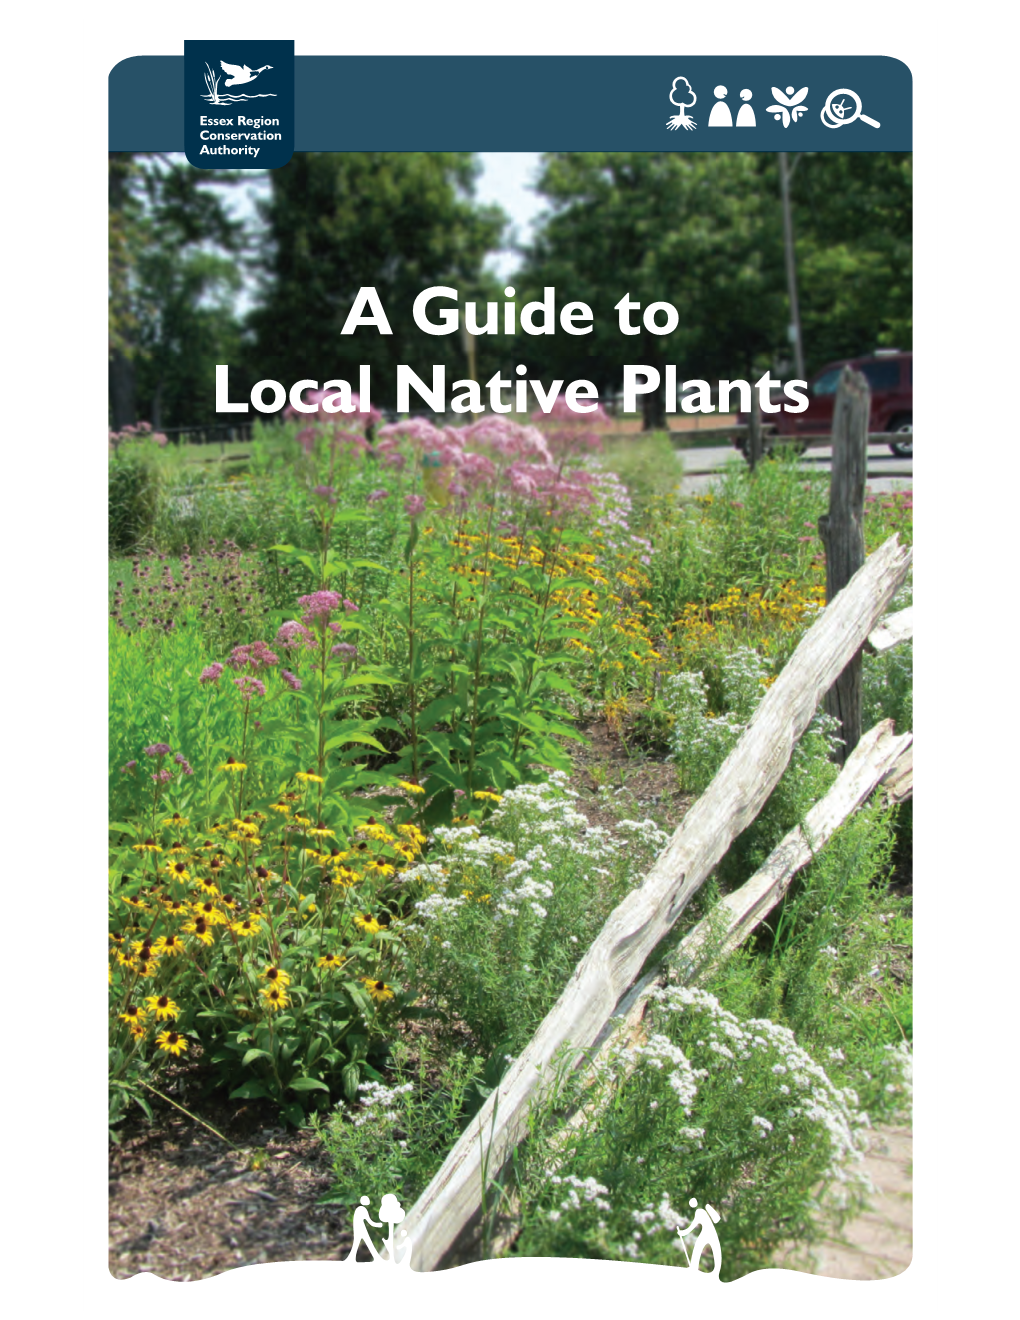 A Guide to Local Native Plants Why Are Native Plants Important?